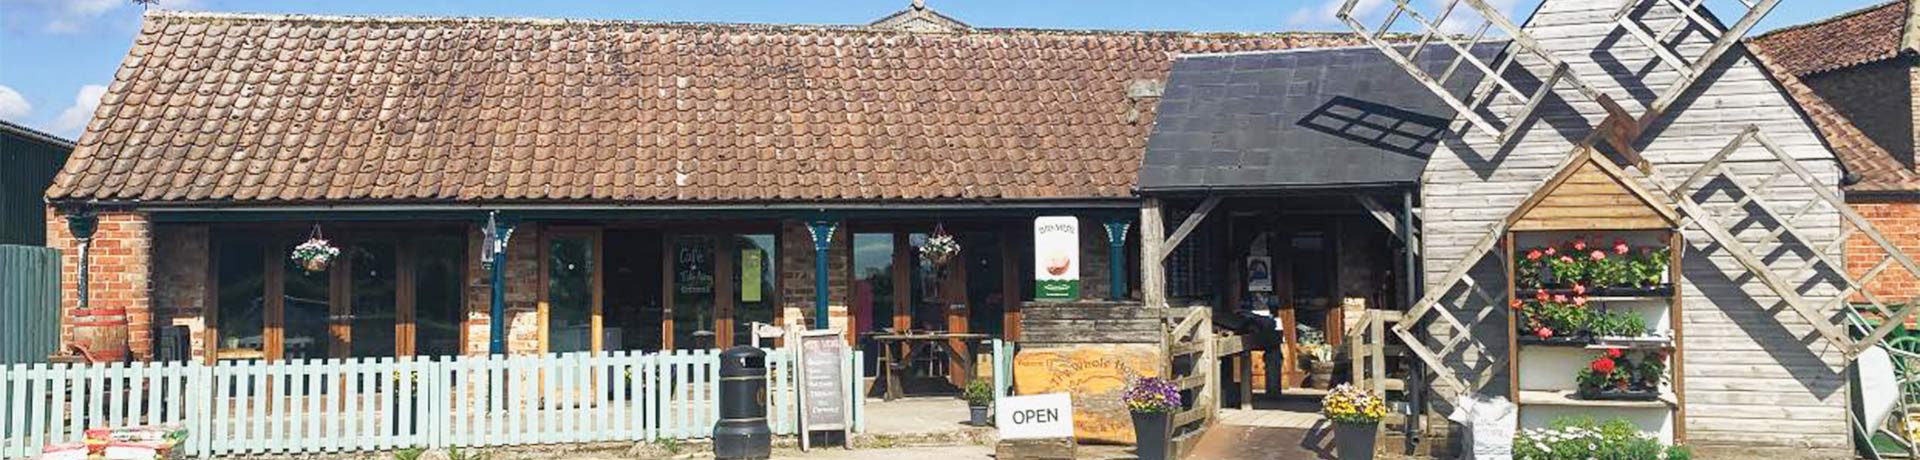 Yorkshire Farm Shops  13 of the best farm shops to visit in Yorkshire